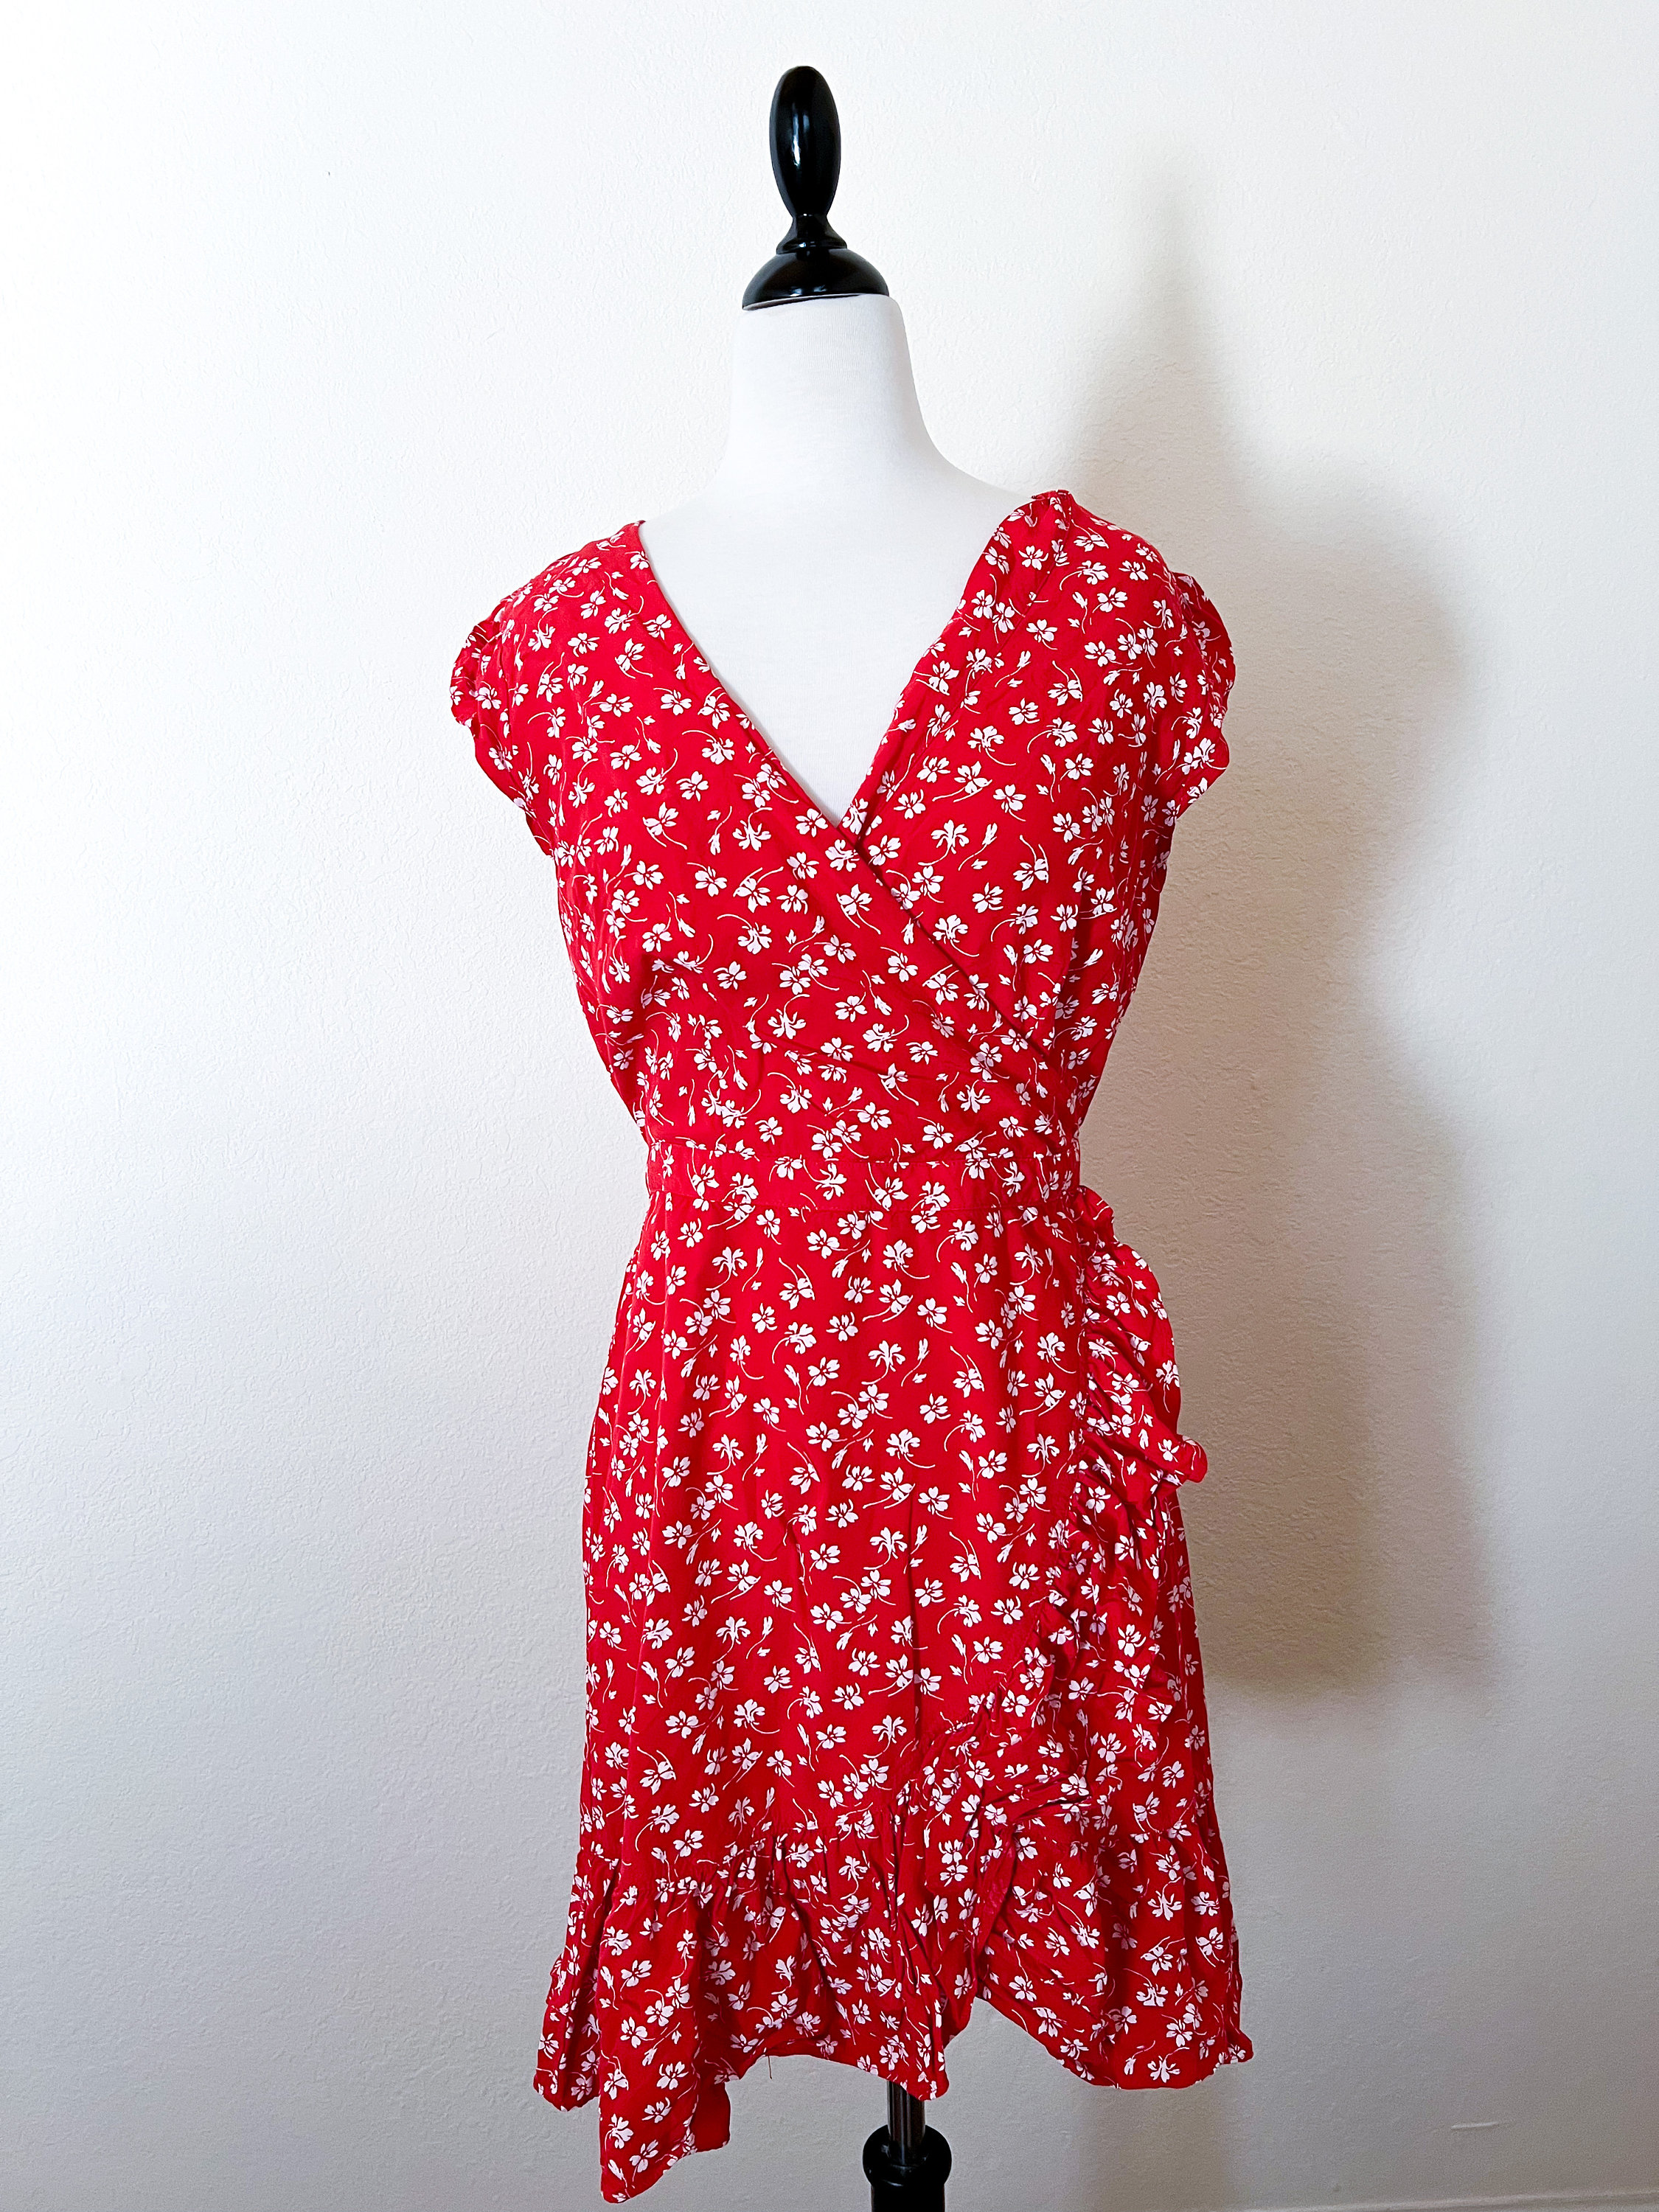 REDUCED Vintage J. Jill Floral Linen Dress, S Petite Size, Pinks and Peach  Colors 